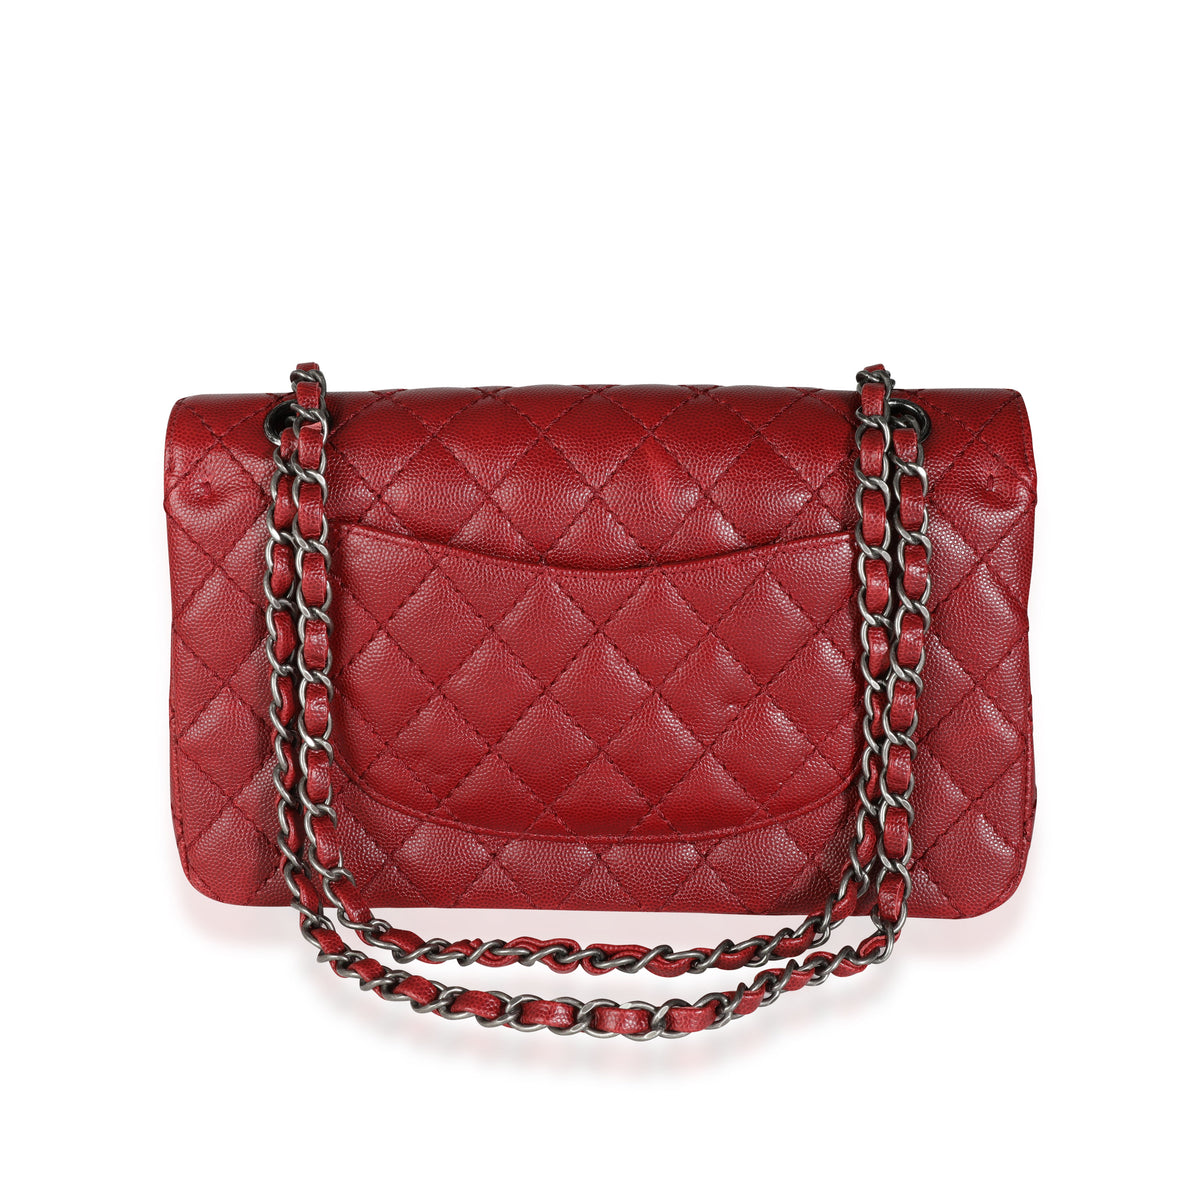 Chanel Dark Red Quilted Caviar Medium Classic Double Flap Bag, myGemma